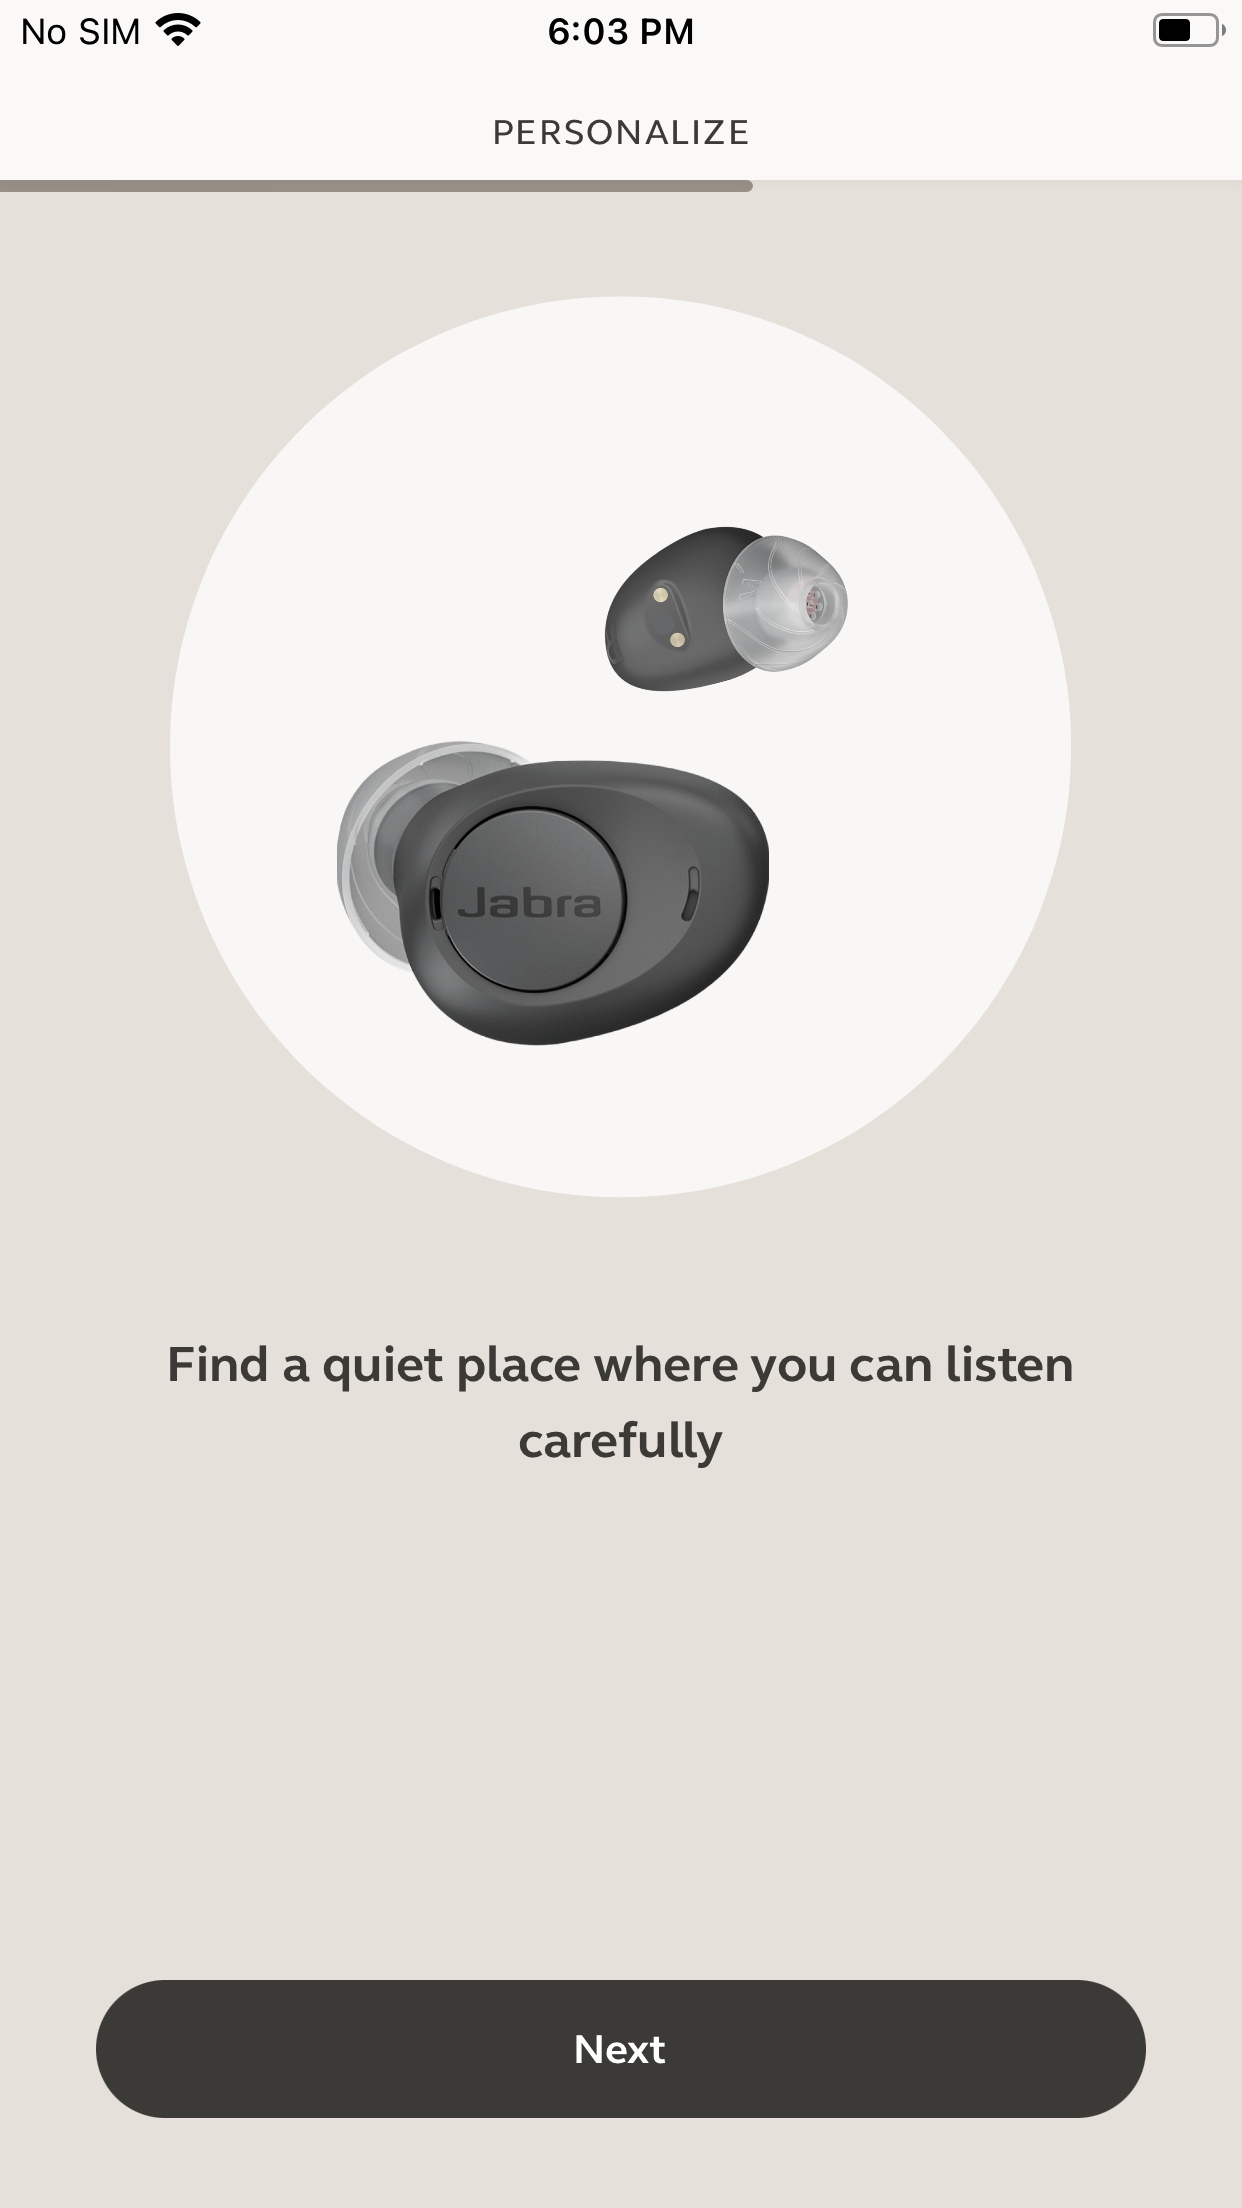 Starting the personalization of the Jabra Enhance Plus in the Enhance app.